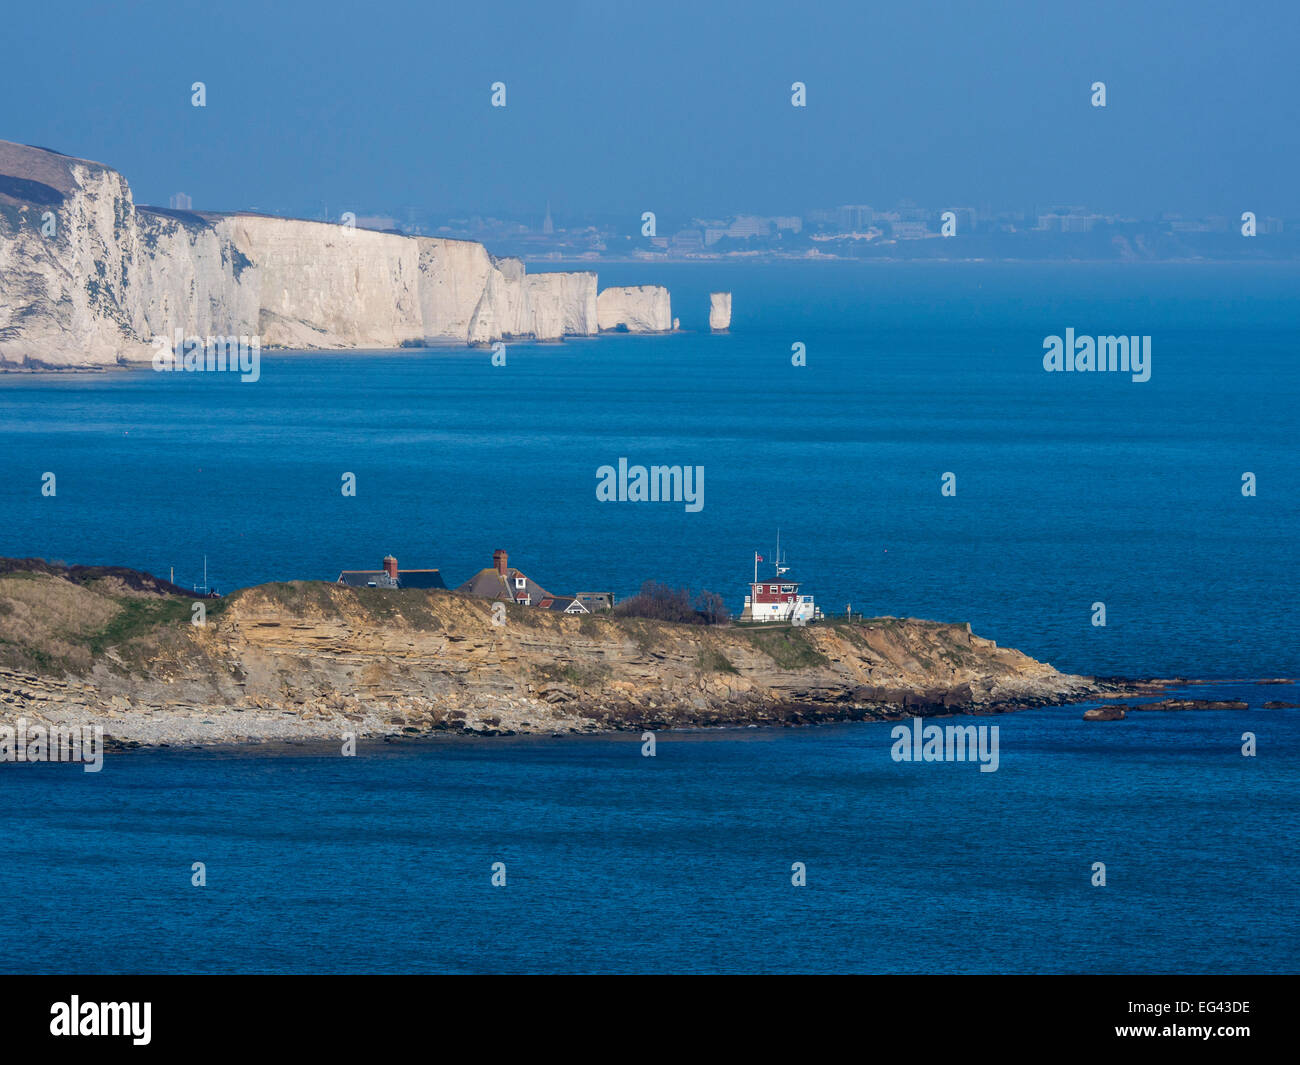 Peveril Point with the Coastguard Station in the foreground and Ballard Cliff in the background, Swanage Bay, Dorset, England, UK Stock Photo